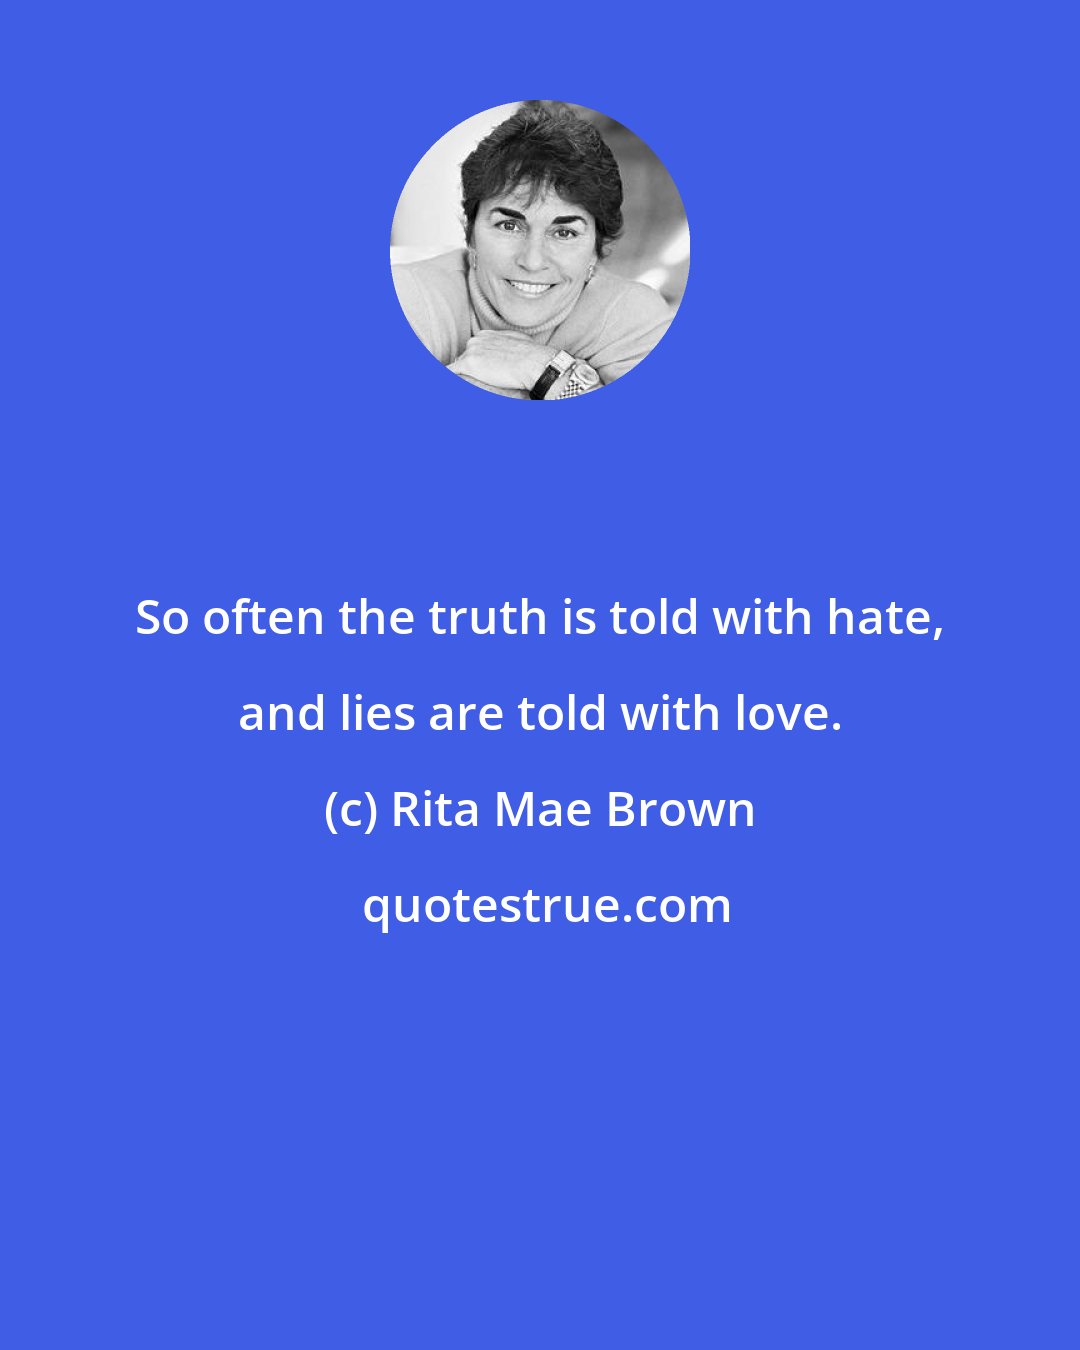 Rita Mae Brown: So often the truth is told with hate, and lies are told with love.